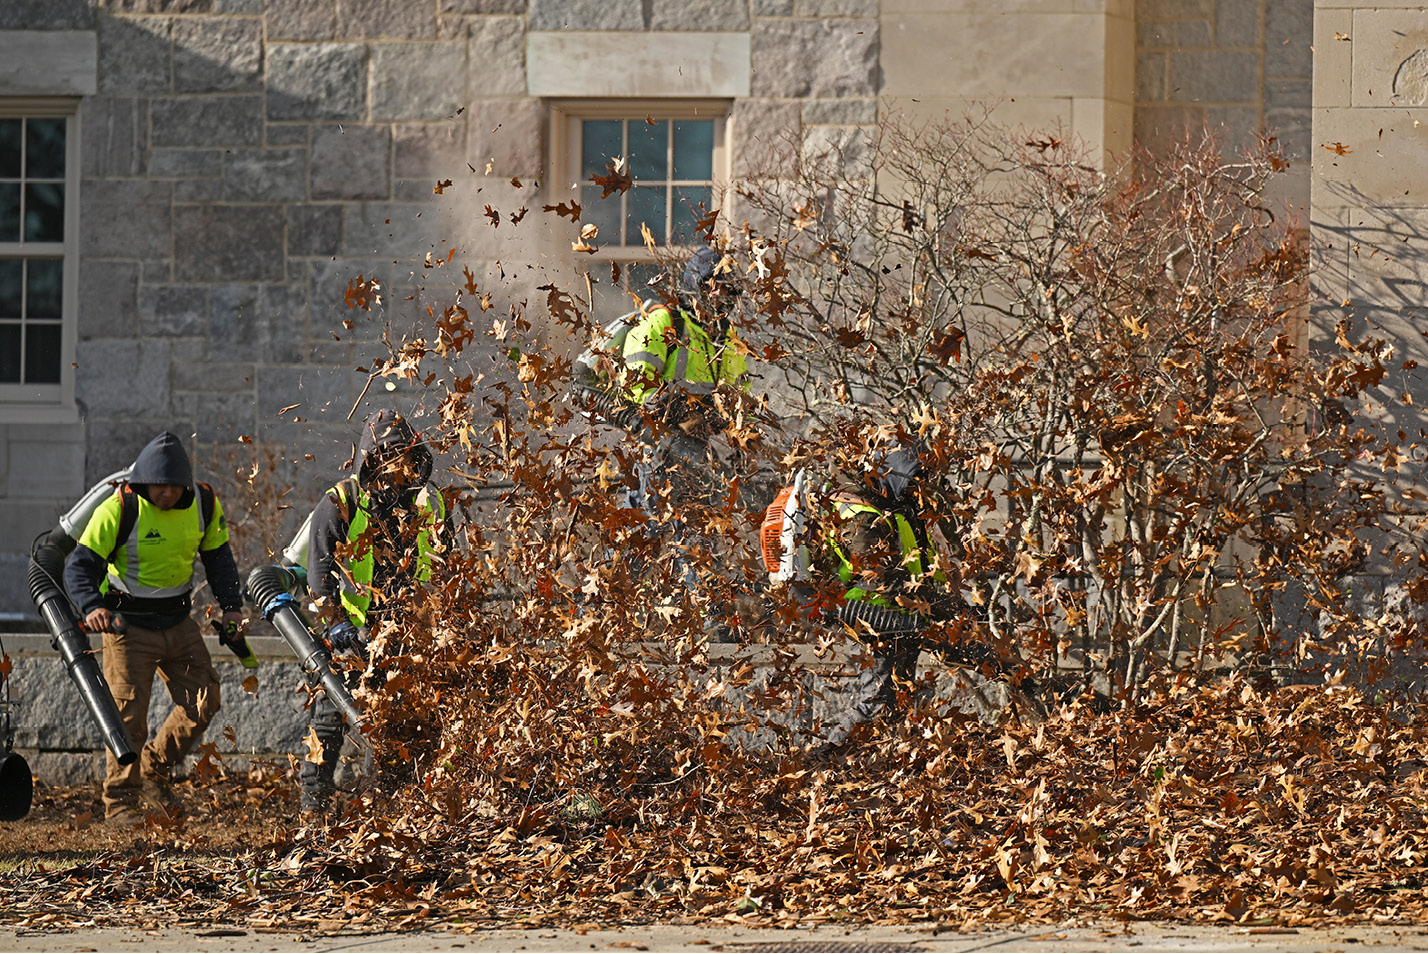 Workers blow leaves with leafblowers.